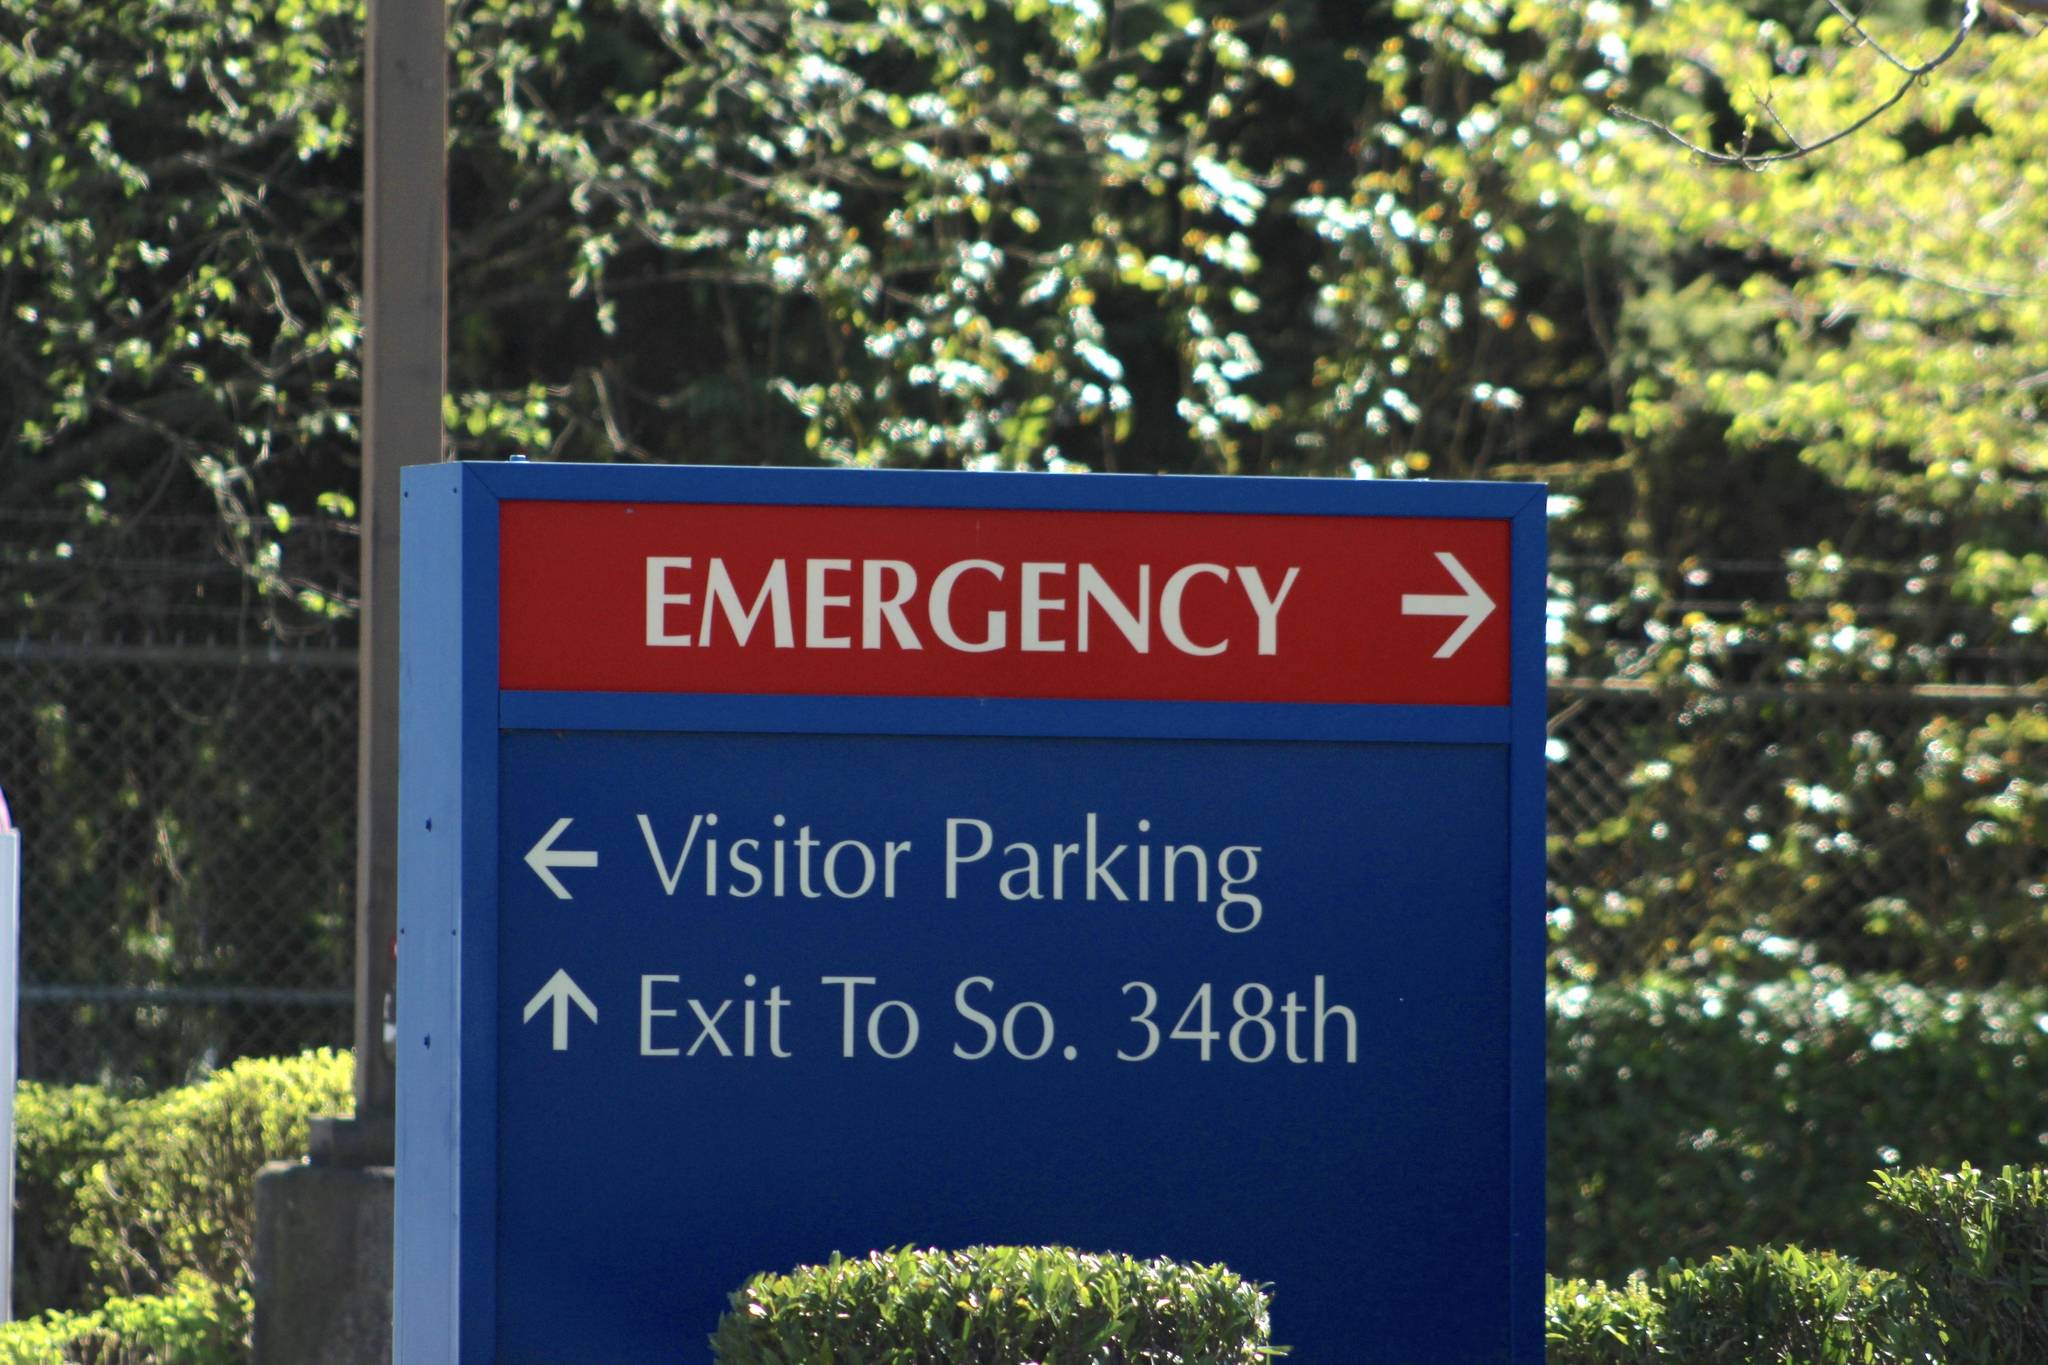 Don’t avoid the emergency department in a crisis